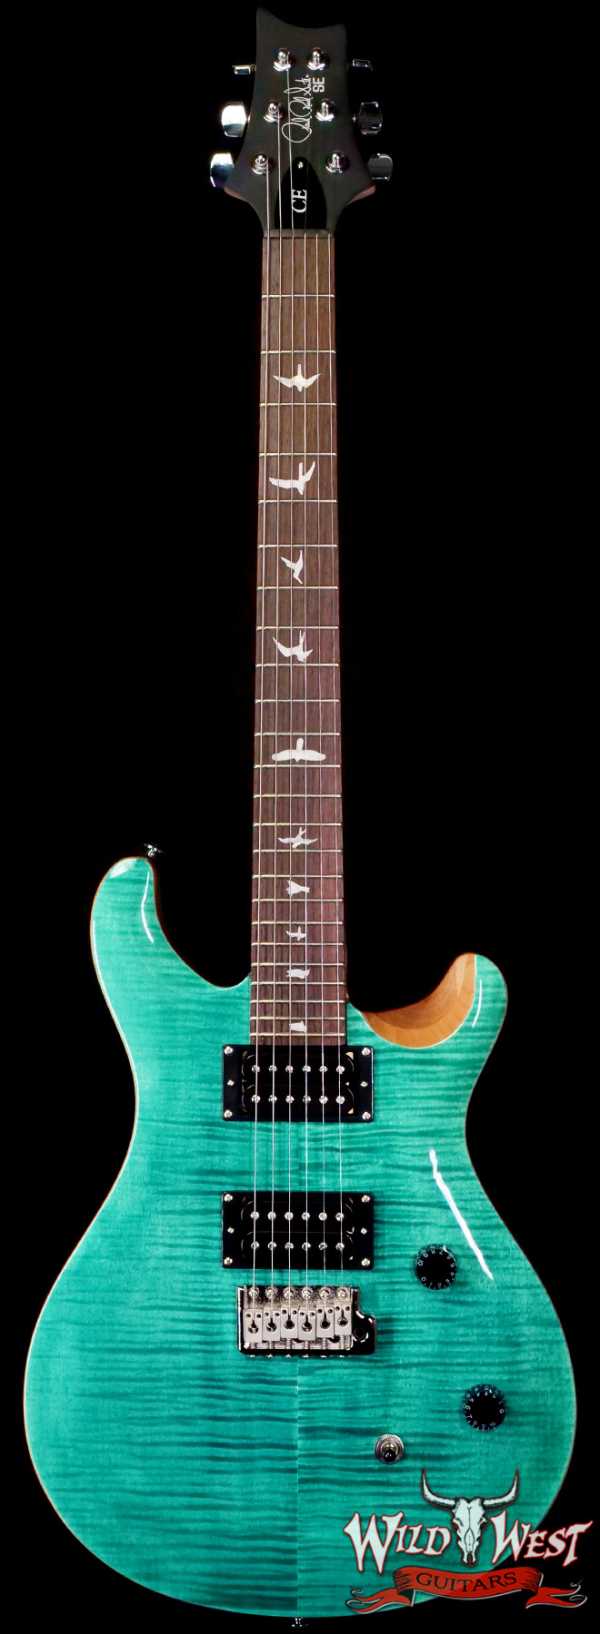 Paul Reed Smith PRS SE Series CE 24 Turquoise F054035 7.65 LBS